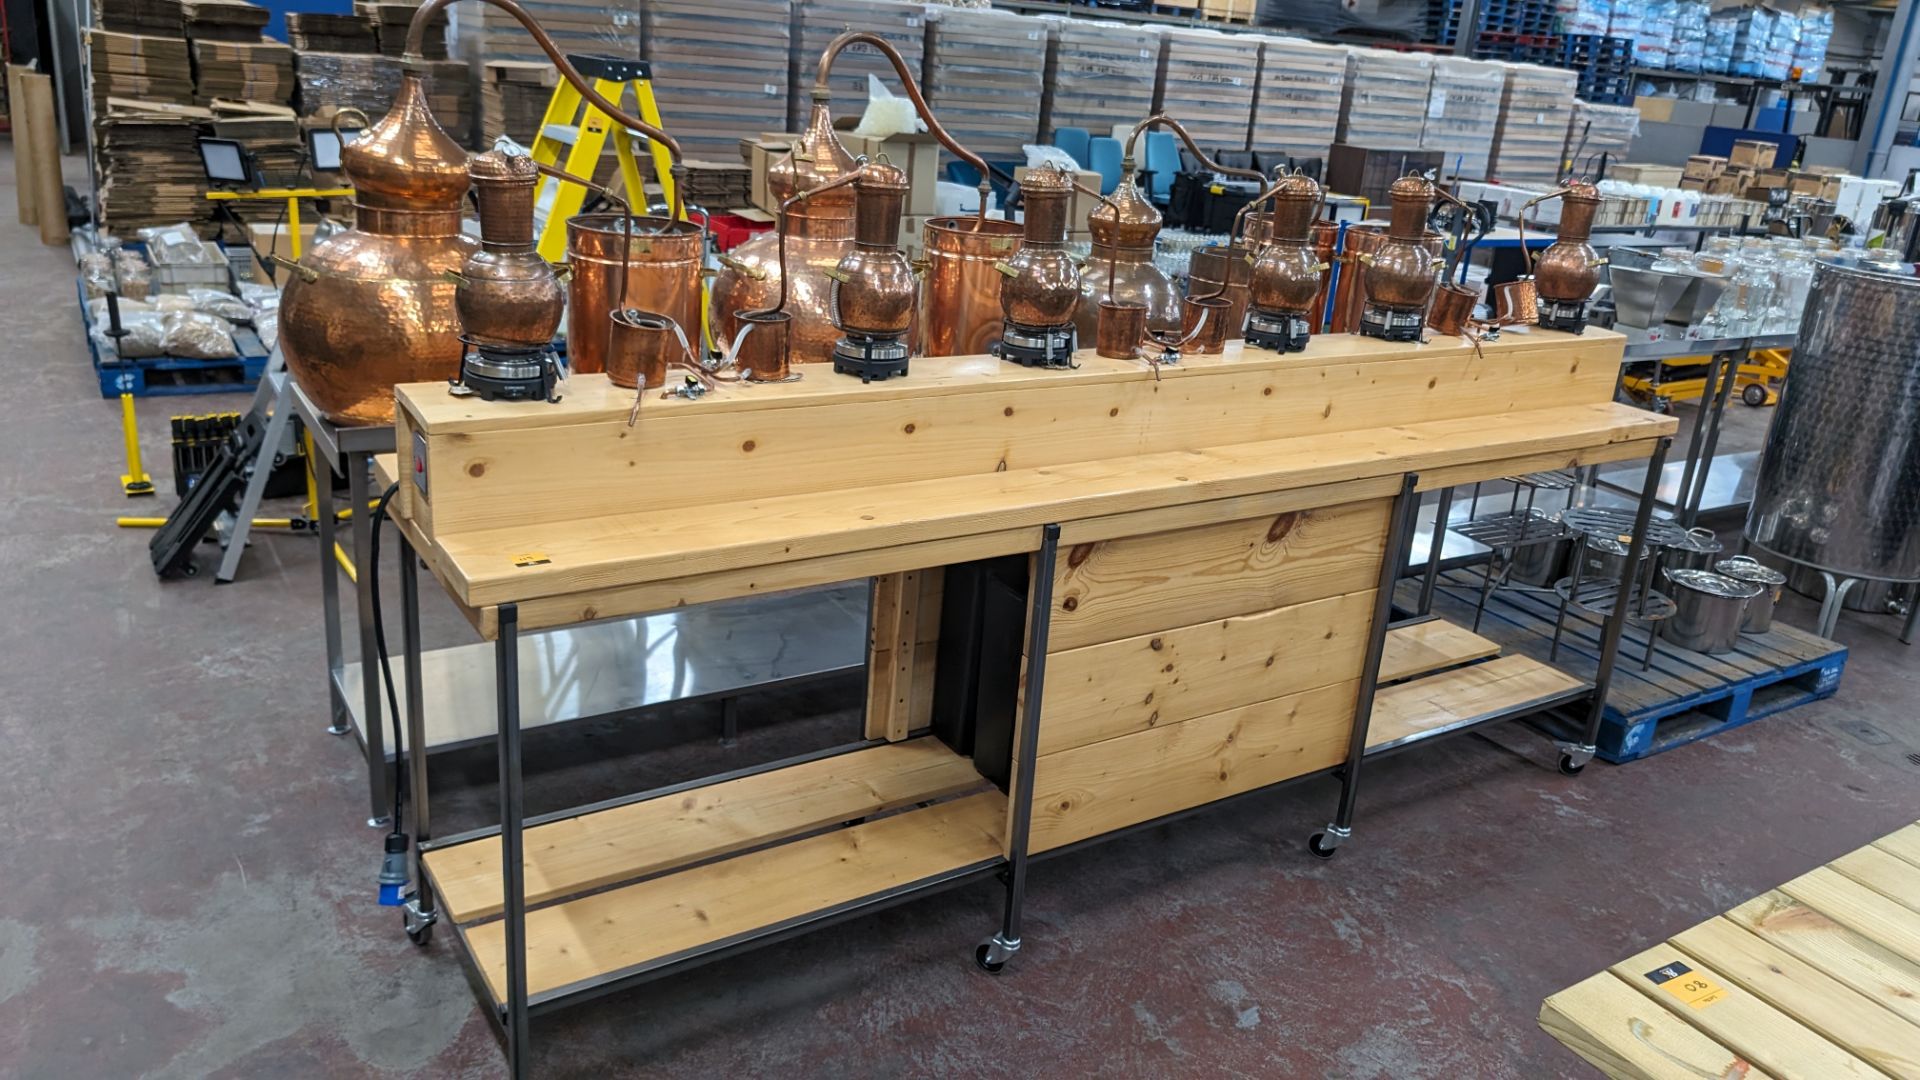 6 off small stills plus mobile bench. This lot comprises a custom made mobile bench with a metal fr - Image 4 of 18